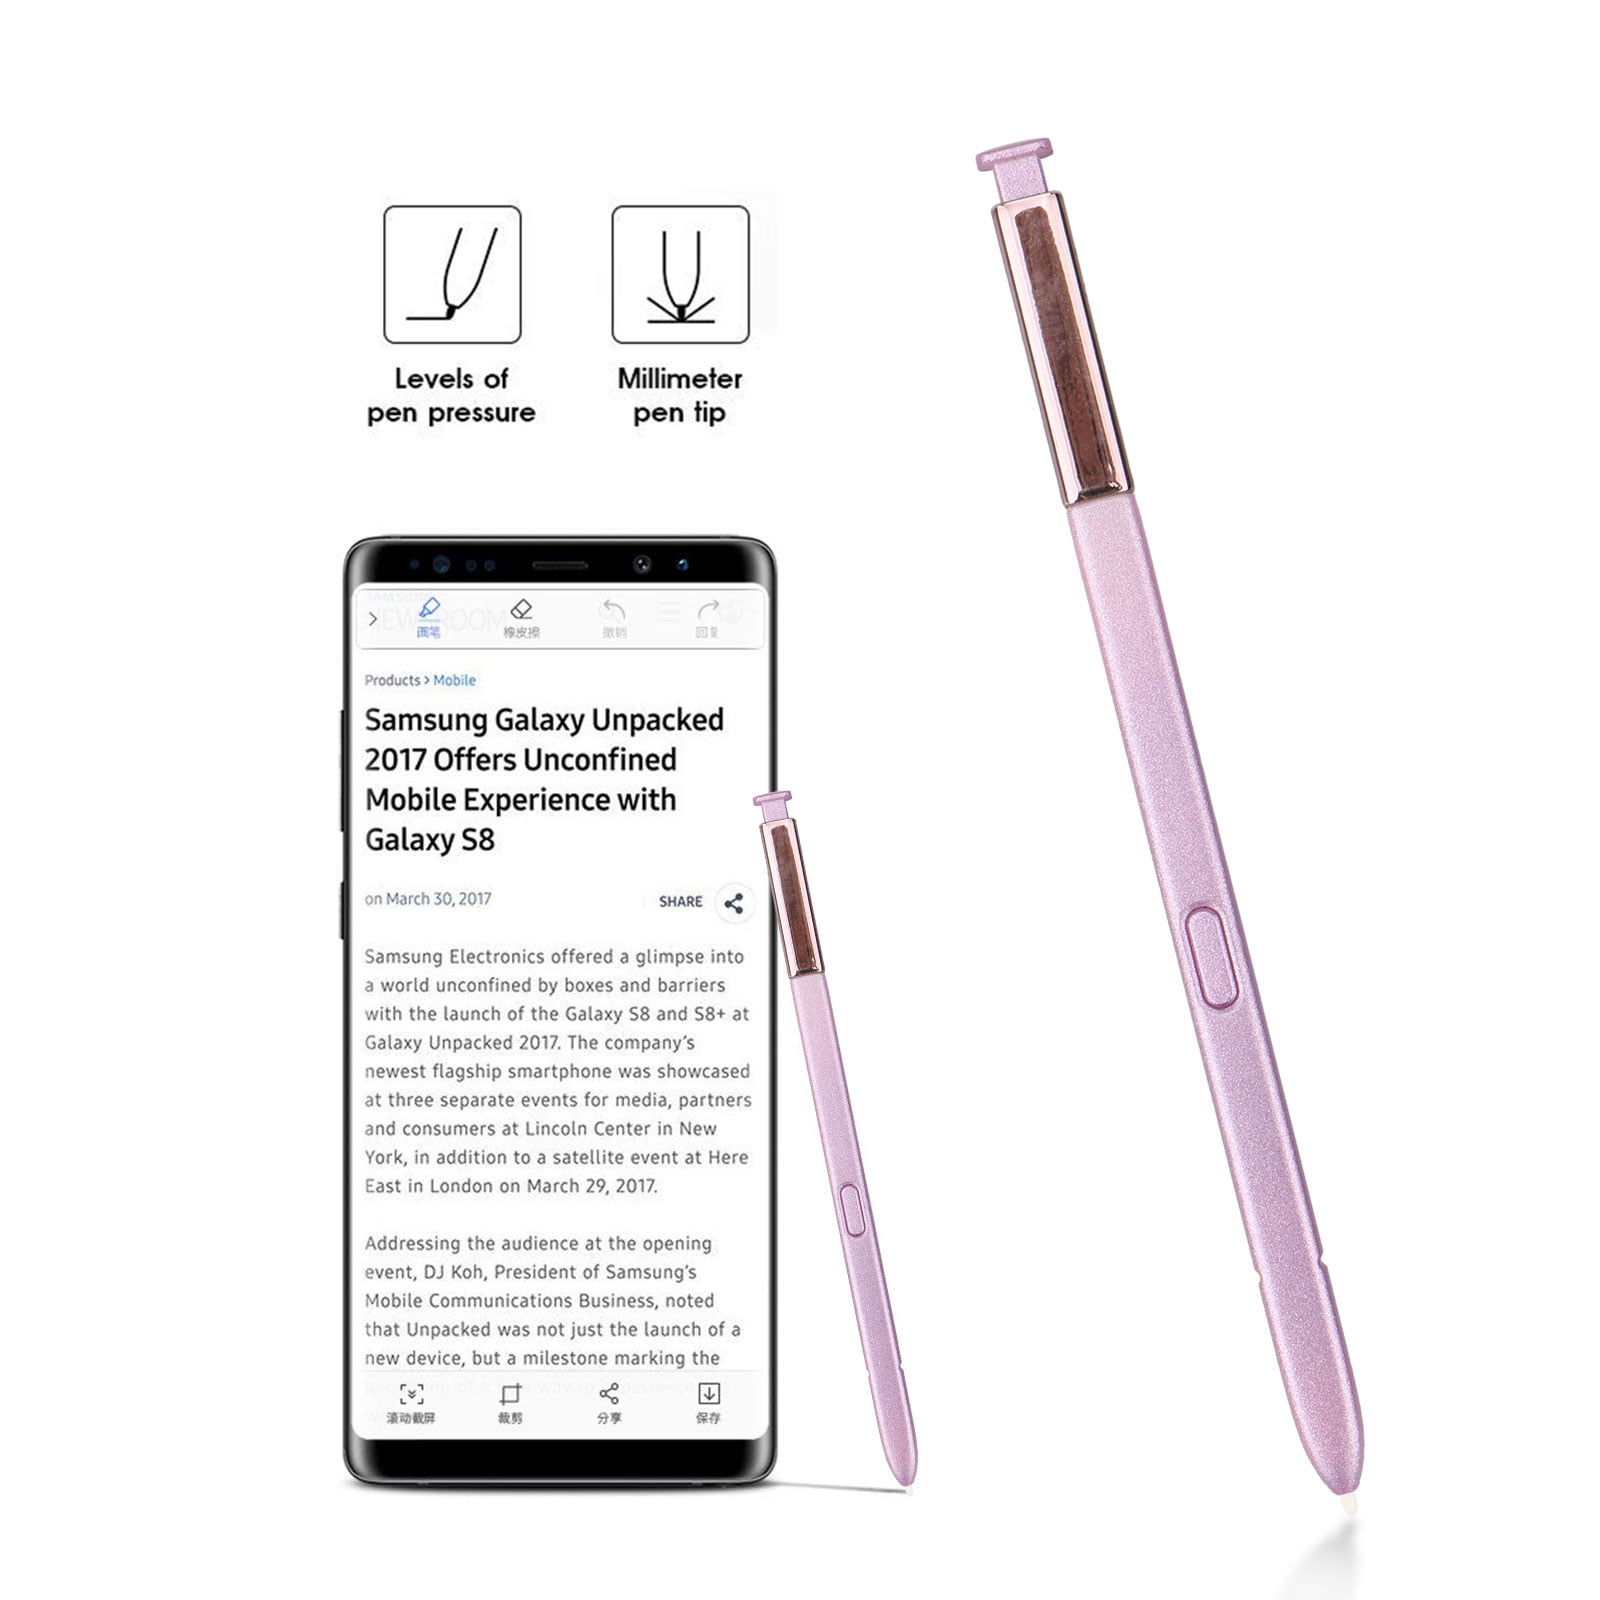 Stylus S Pen Replacement For Samsung Galaxy Note5 AT&T Verizon Sprint T-MobileBS